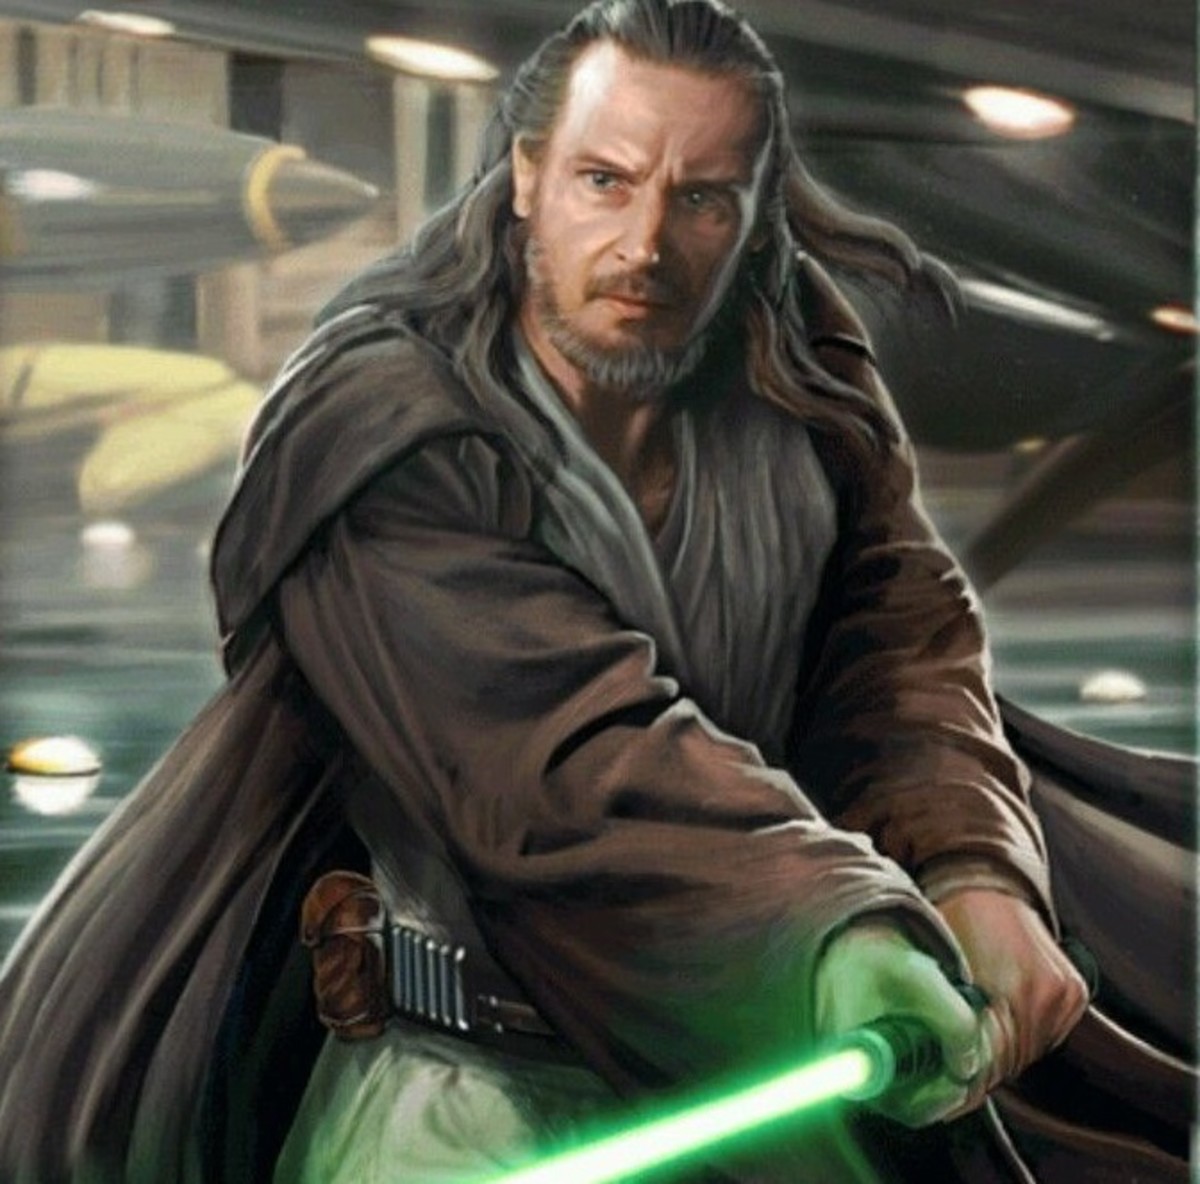 Who is the Best Jedi Ever?